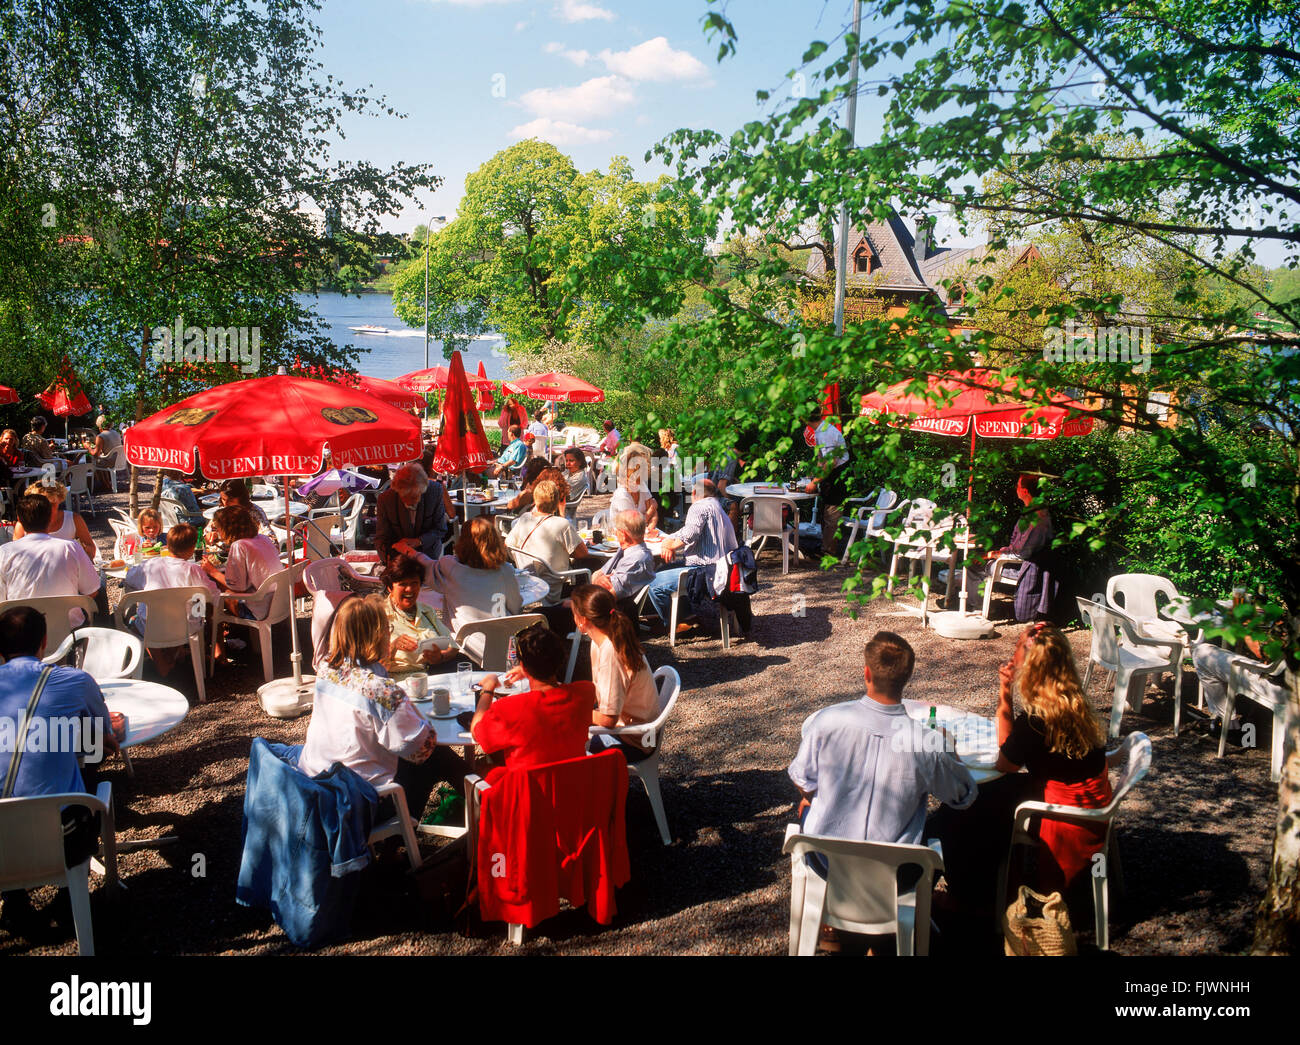 Families and visitors at Cafe Amadeus sharing summer food and conversation  in scenic Djurgarden Djurgården park in Stockholm Stock Photo